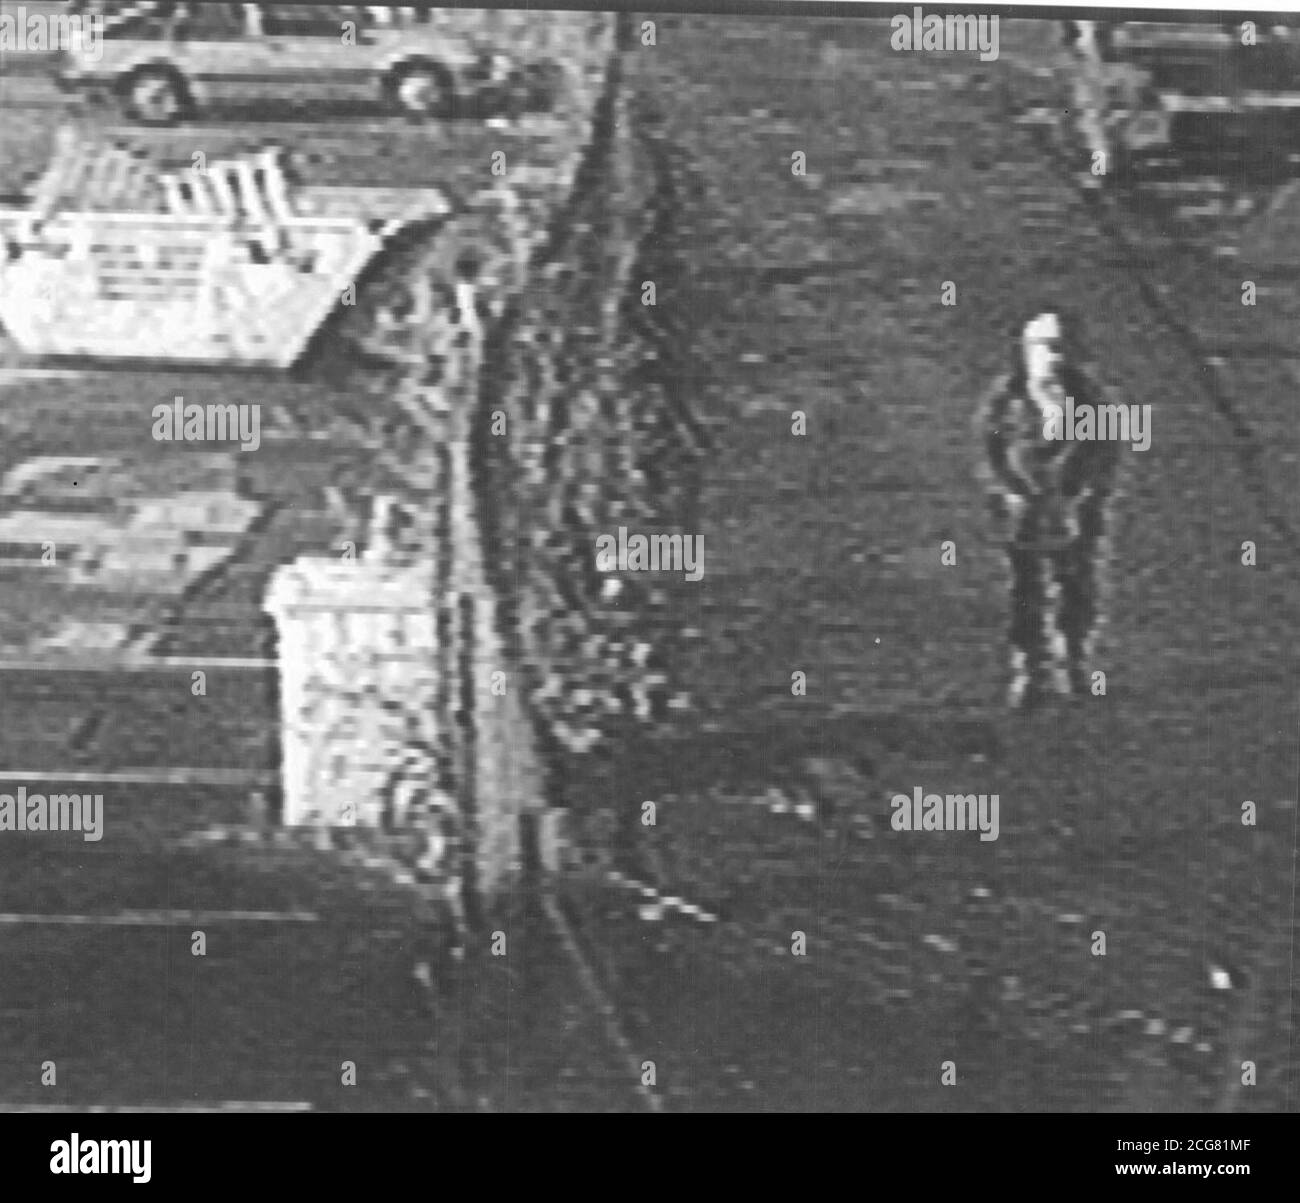 Scotland Yard collect photo issued 8/4/03 of a suspect at the car yard in Edmonton linked with Real IRA bombing outside the BBC Television centre. * Three Irish terrorists were convicted at the Old Bailey of plotting a Real IRA bombing campaign in mainland Britain - endangering life and severely damaging property. They were frontliners in a conspiracy responsible for car bomb attacks on three busy centres on Saturday nights during 2001. The first was on the BBC Television centre in March, then in Ealing Broadway, west London, in August and finally in Smallbrook, Queensway, Birmingham in Stock Photo